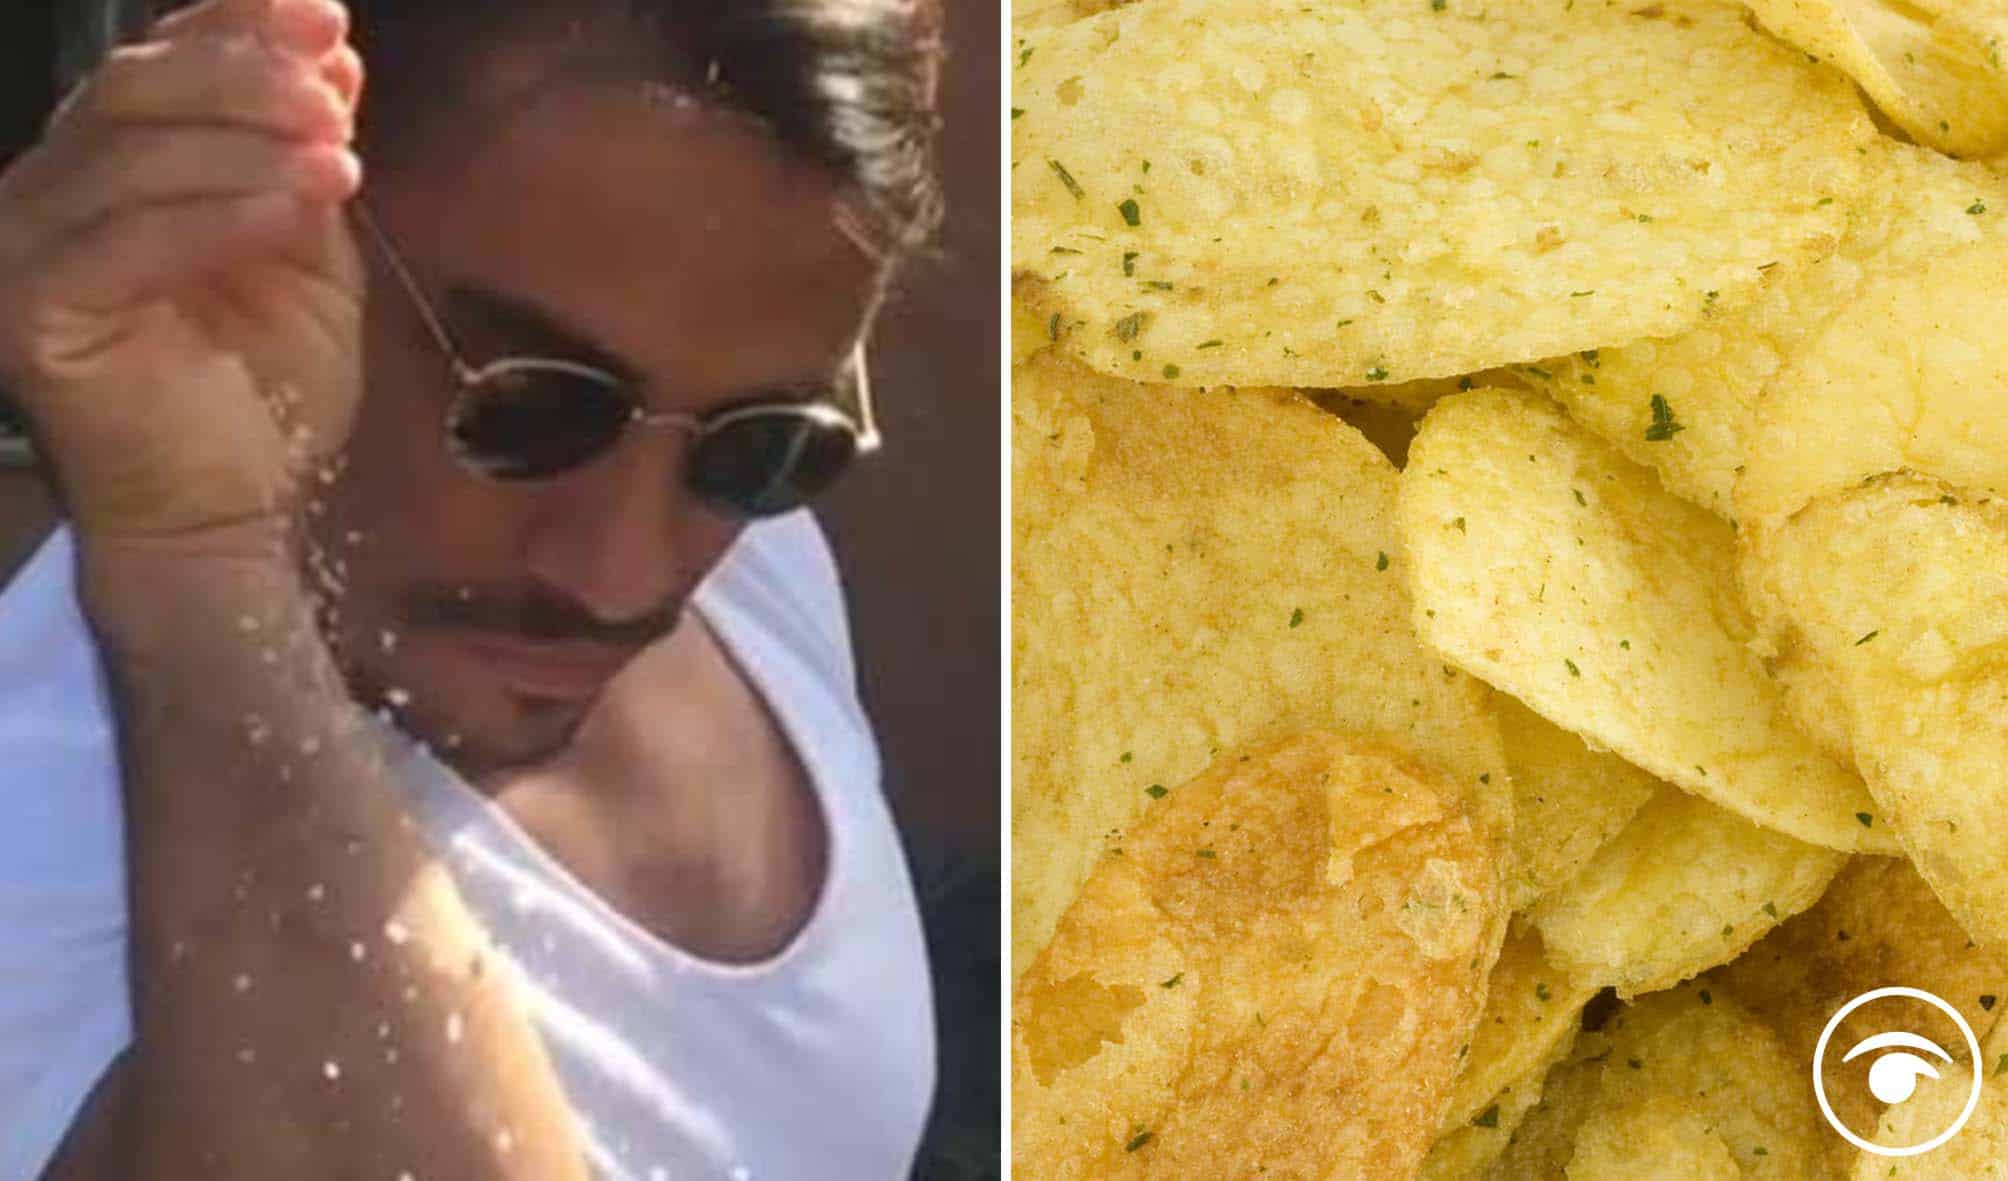 Salt Bae staff hourly rate less than a bowl of crisps at his London restaurant